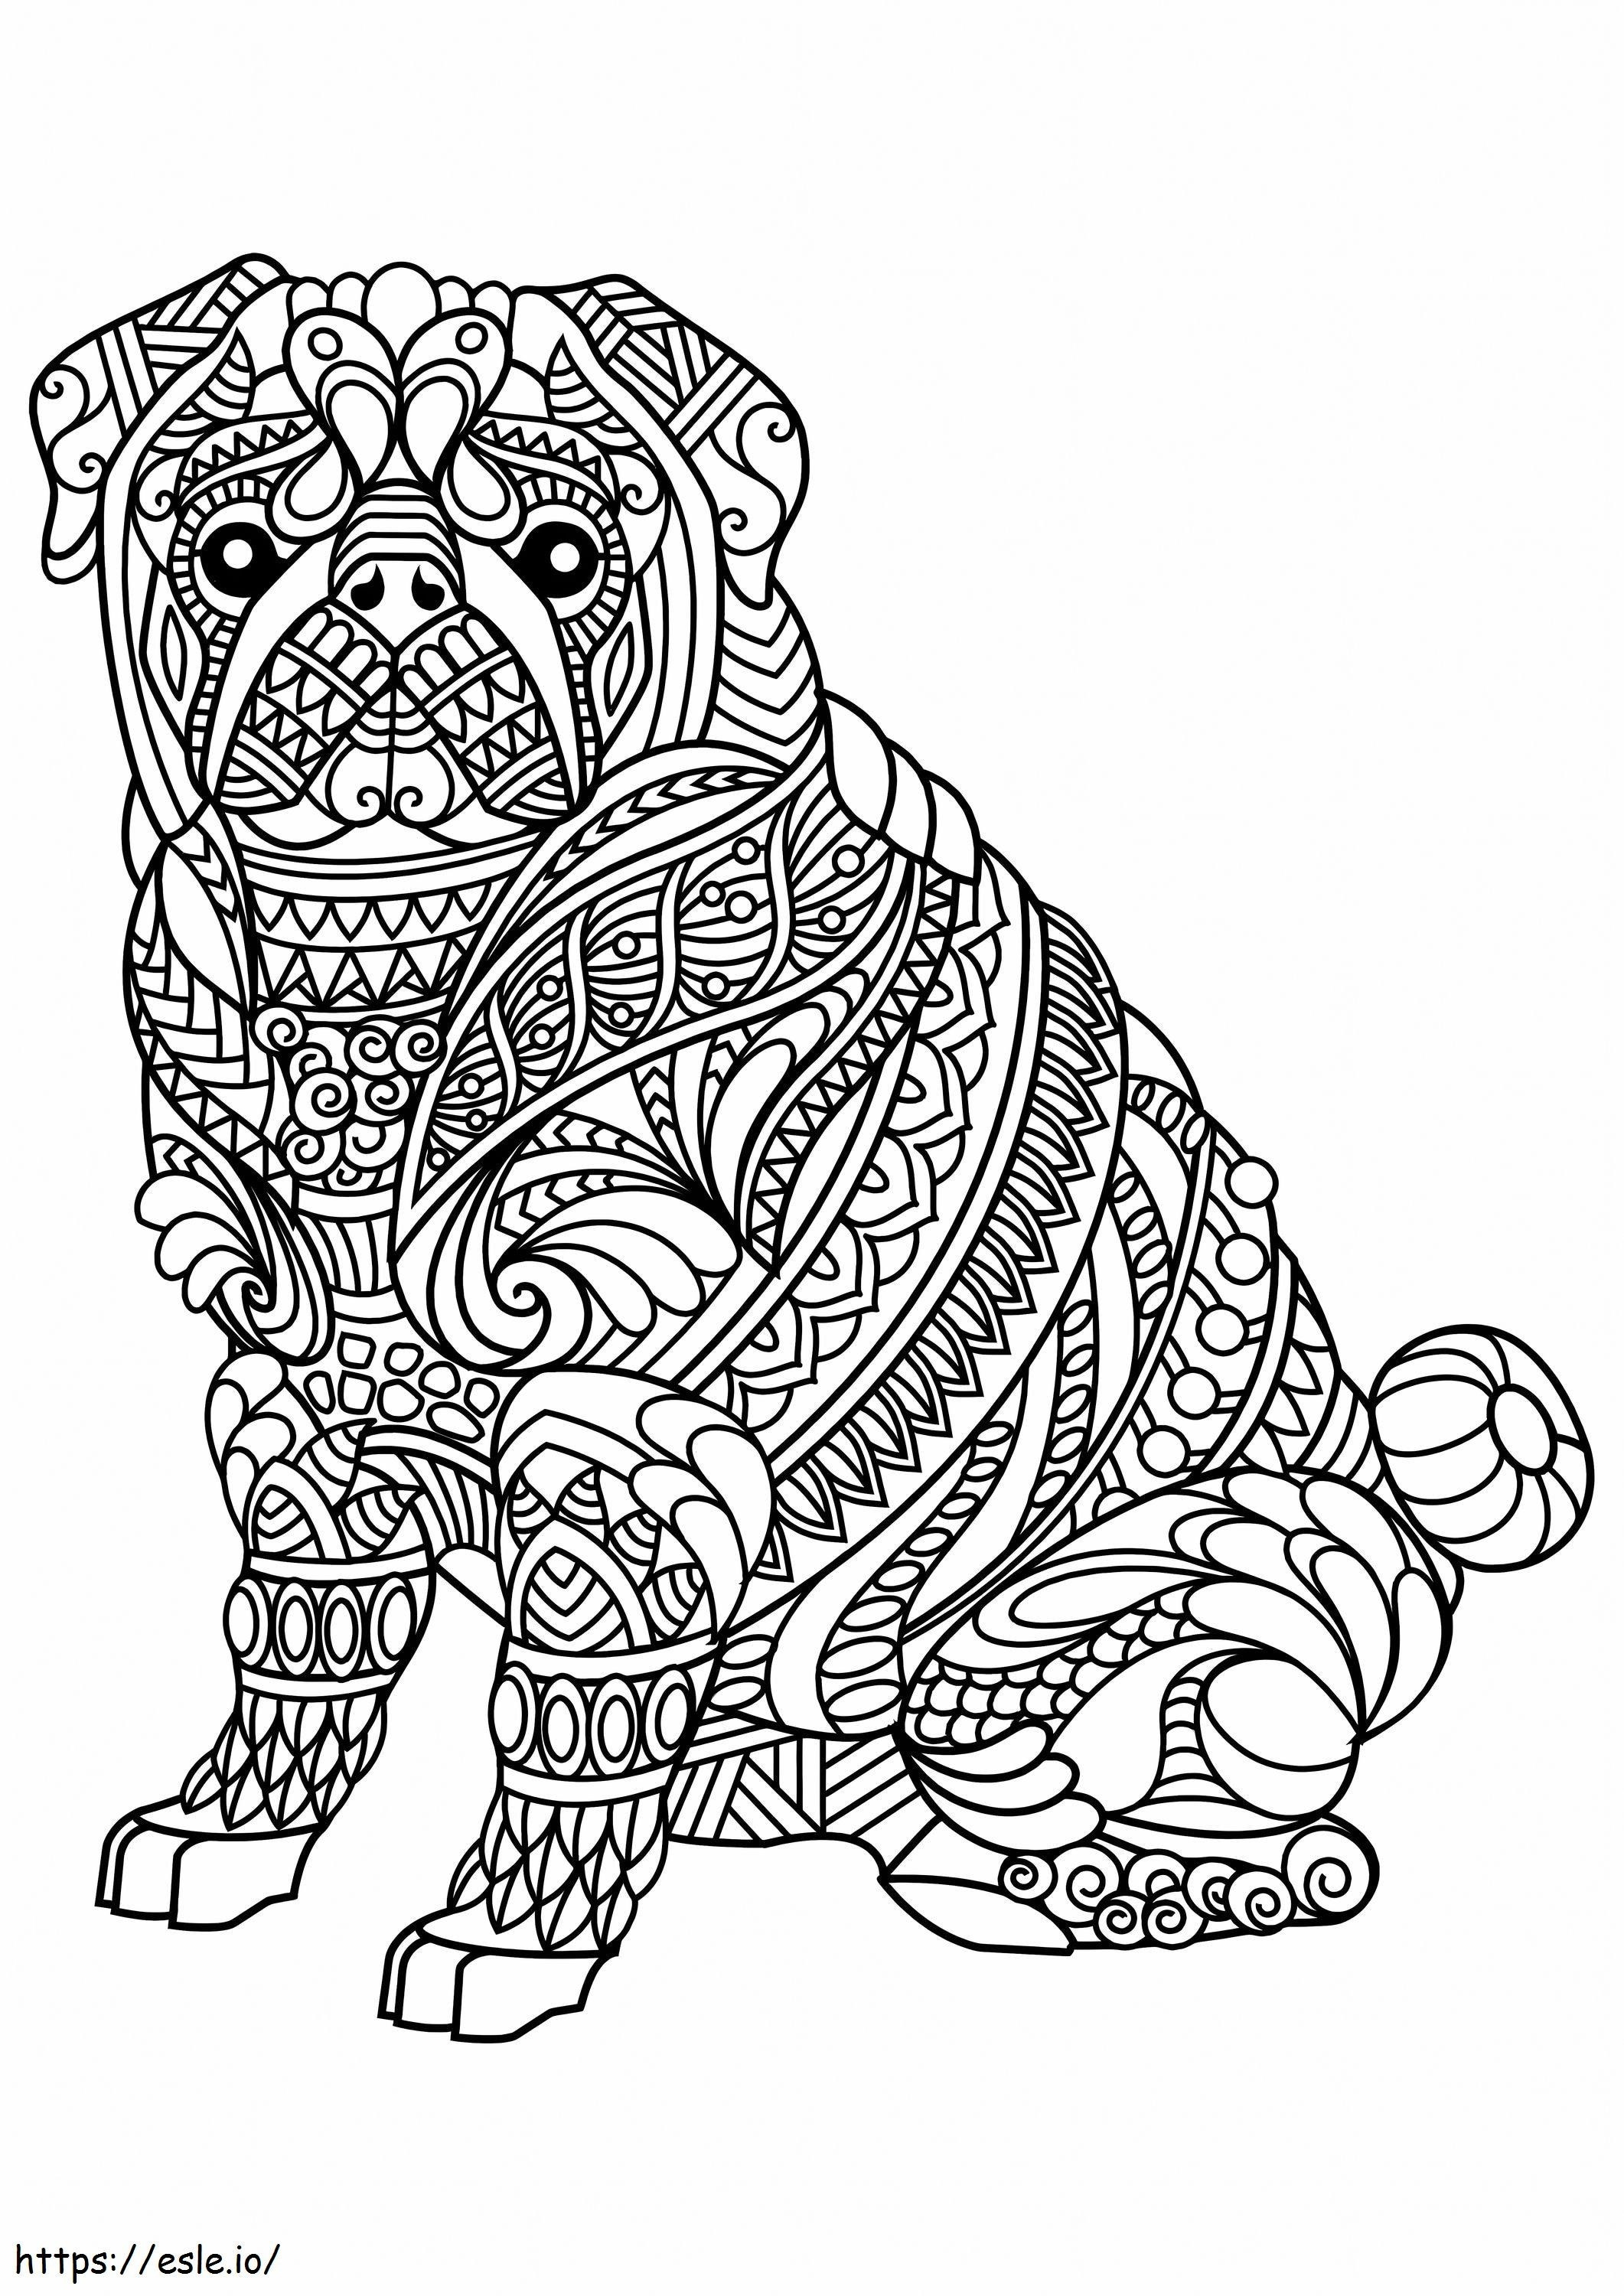 Bulldog Is For Adults coloring page